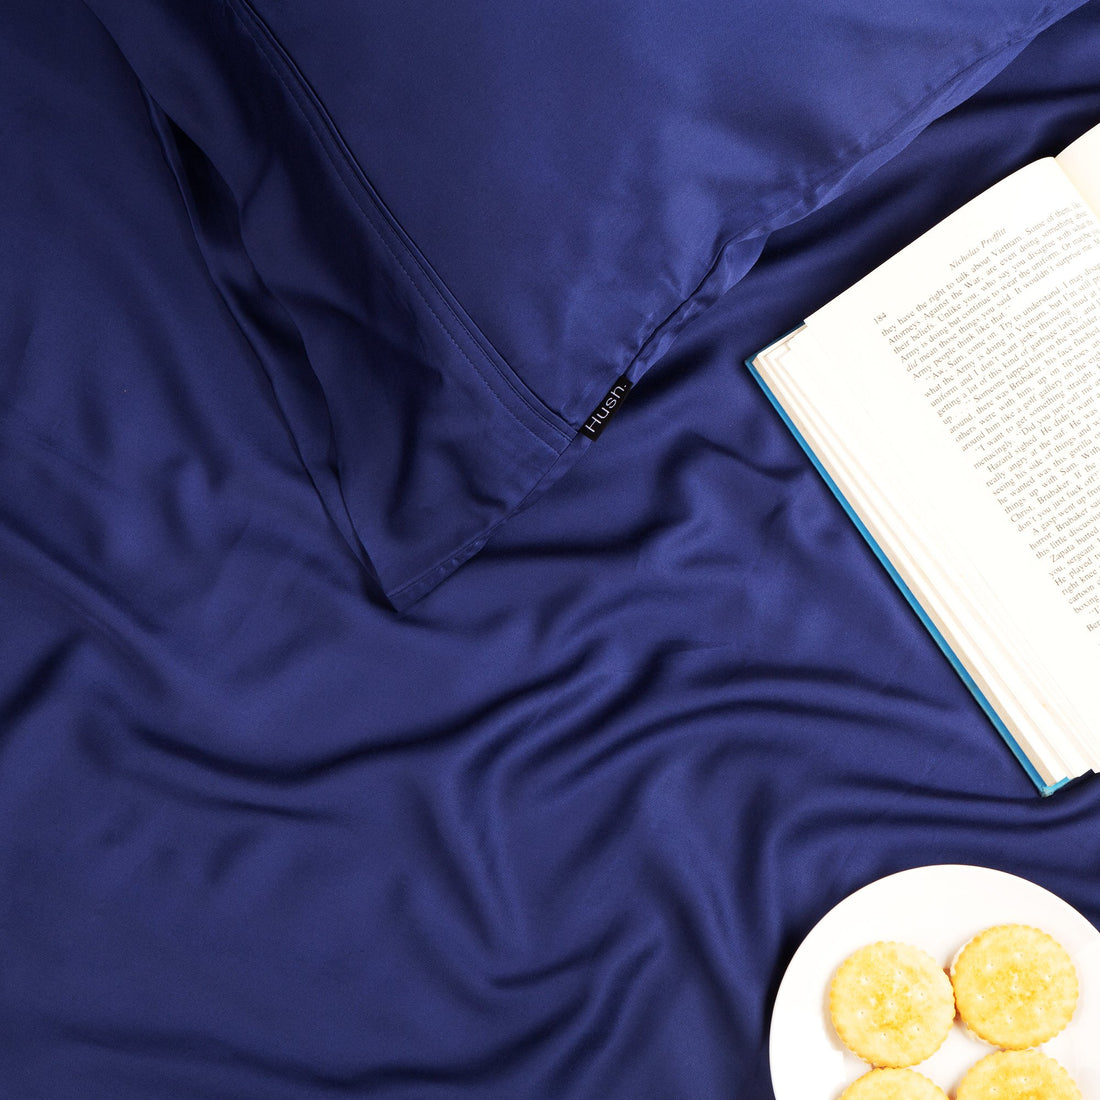 A plate of cookies and a book sitting on top of a set of Hush Iced 2.0 Bamboo sheets in Navy color.